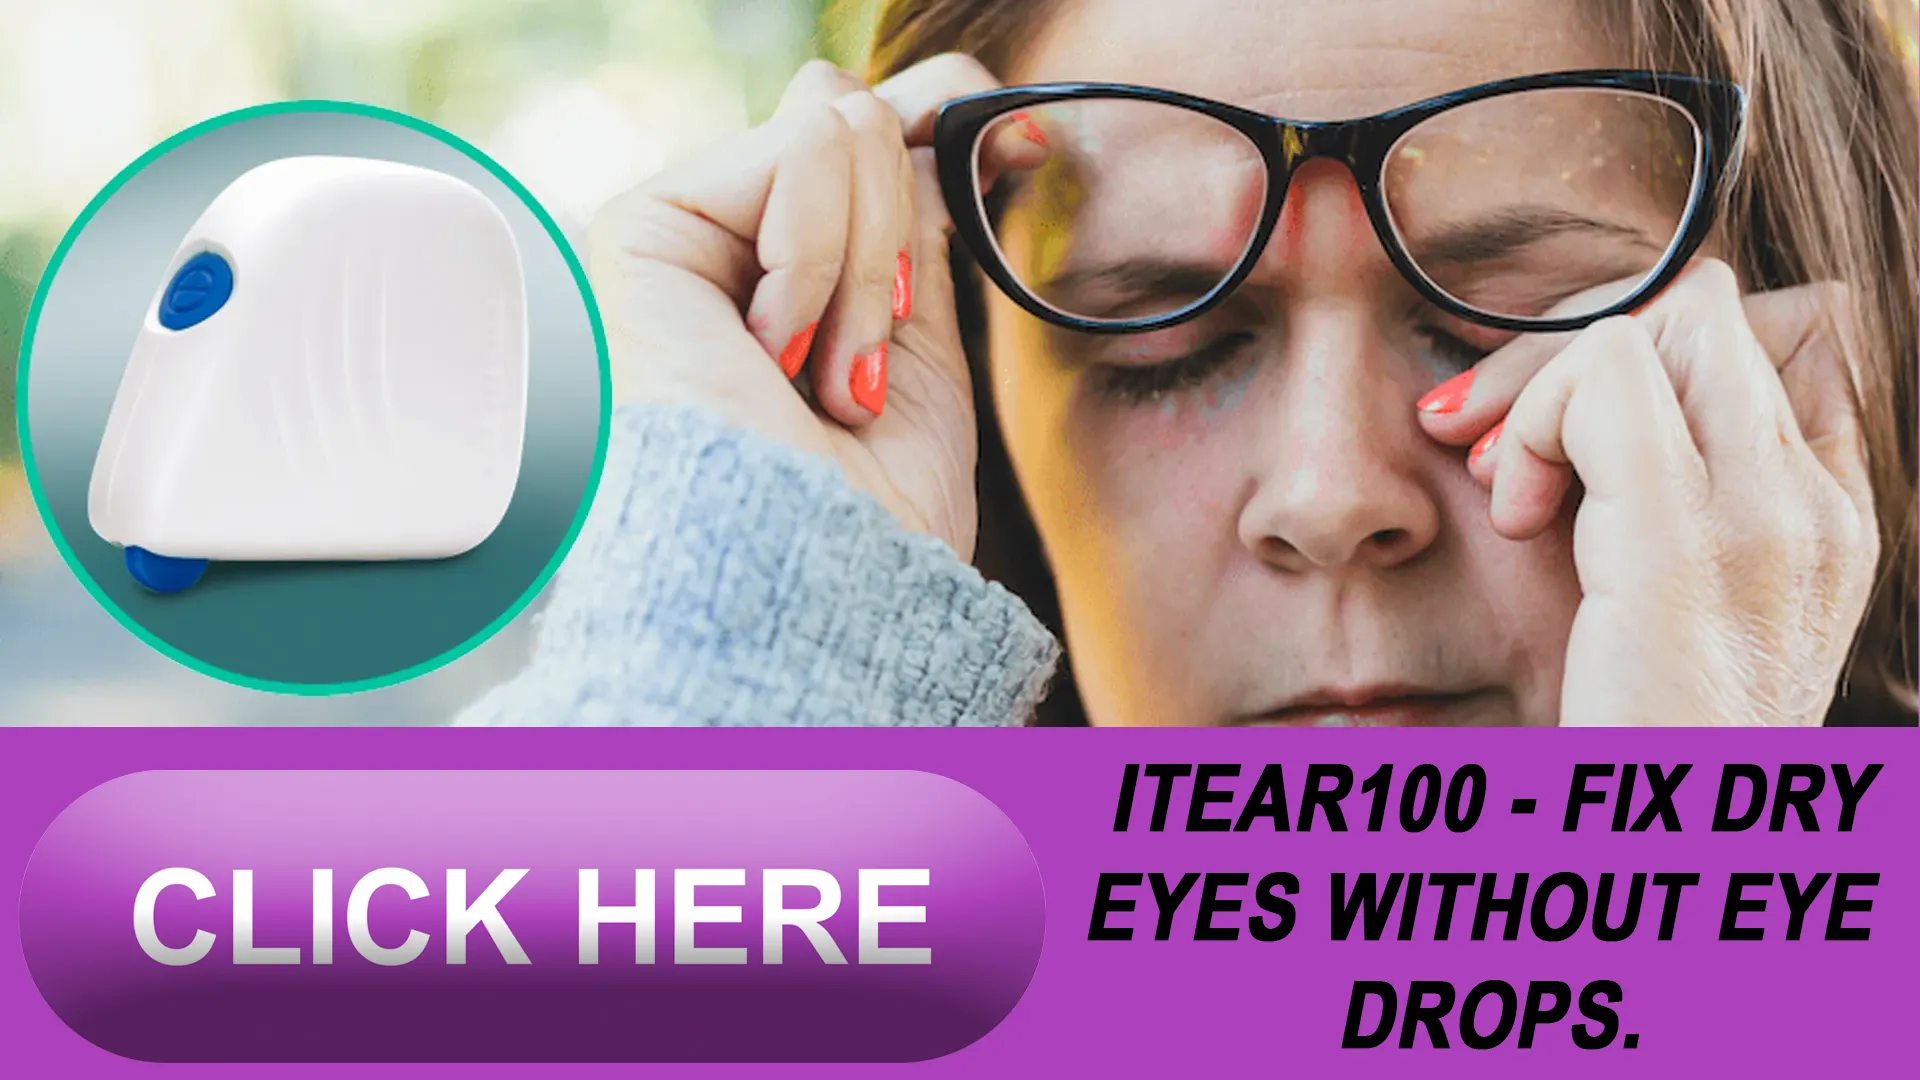 Advantages Over Traditional Eye Drops